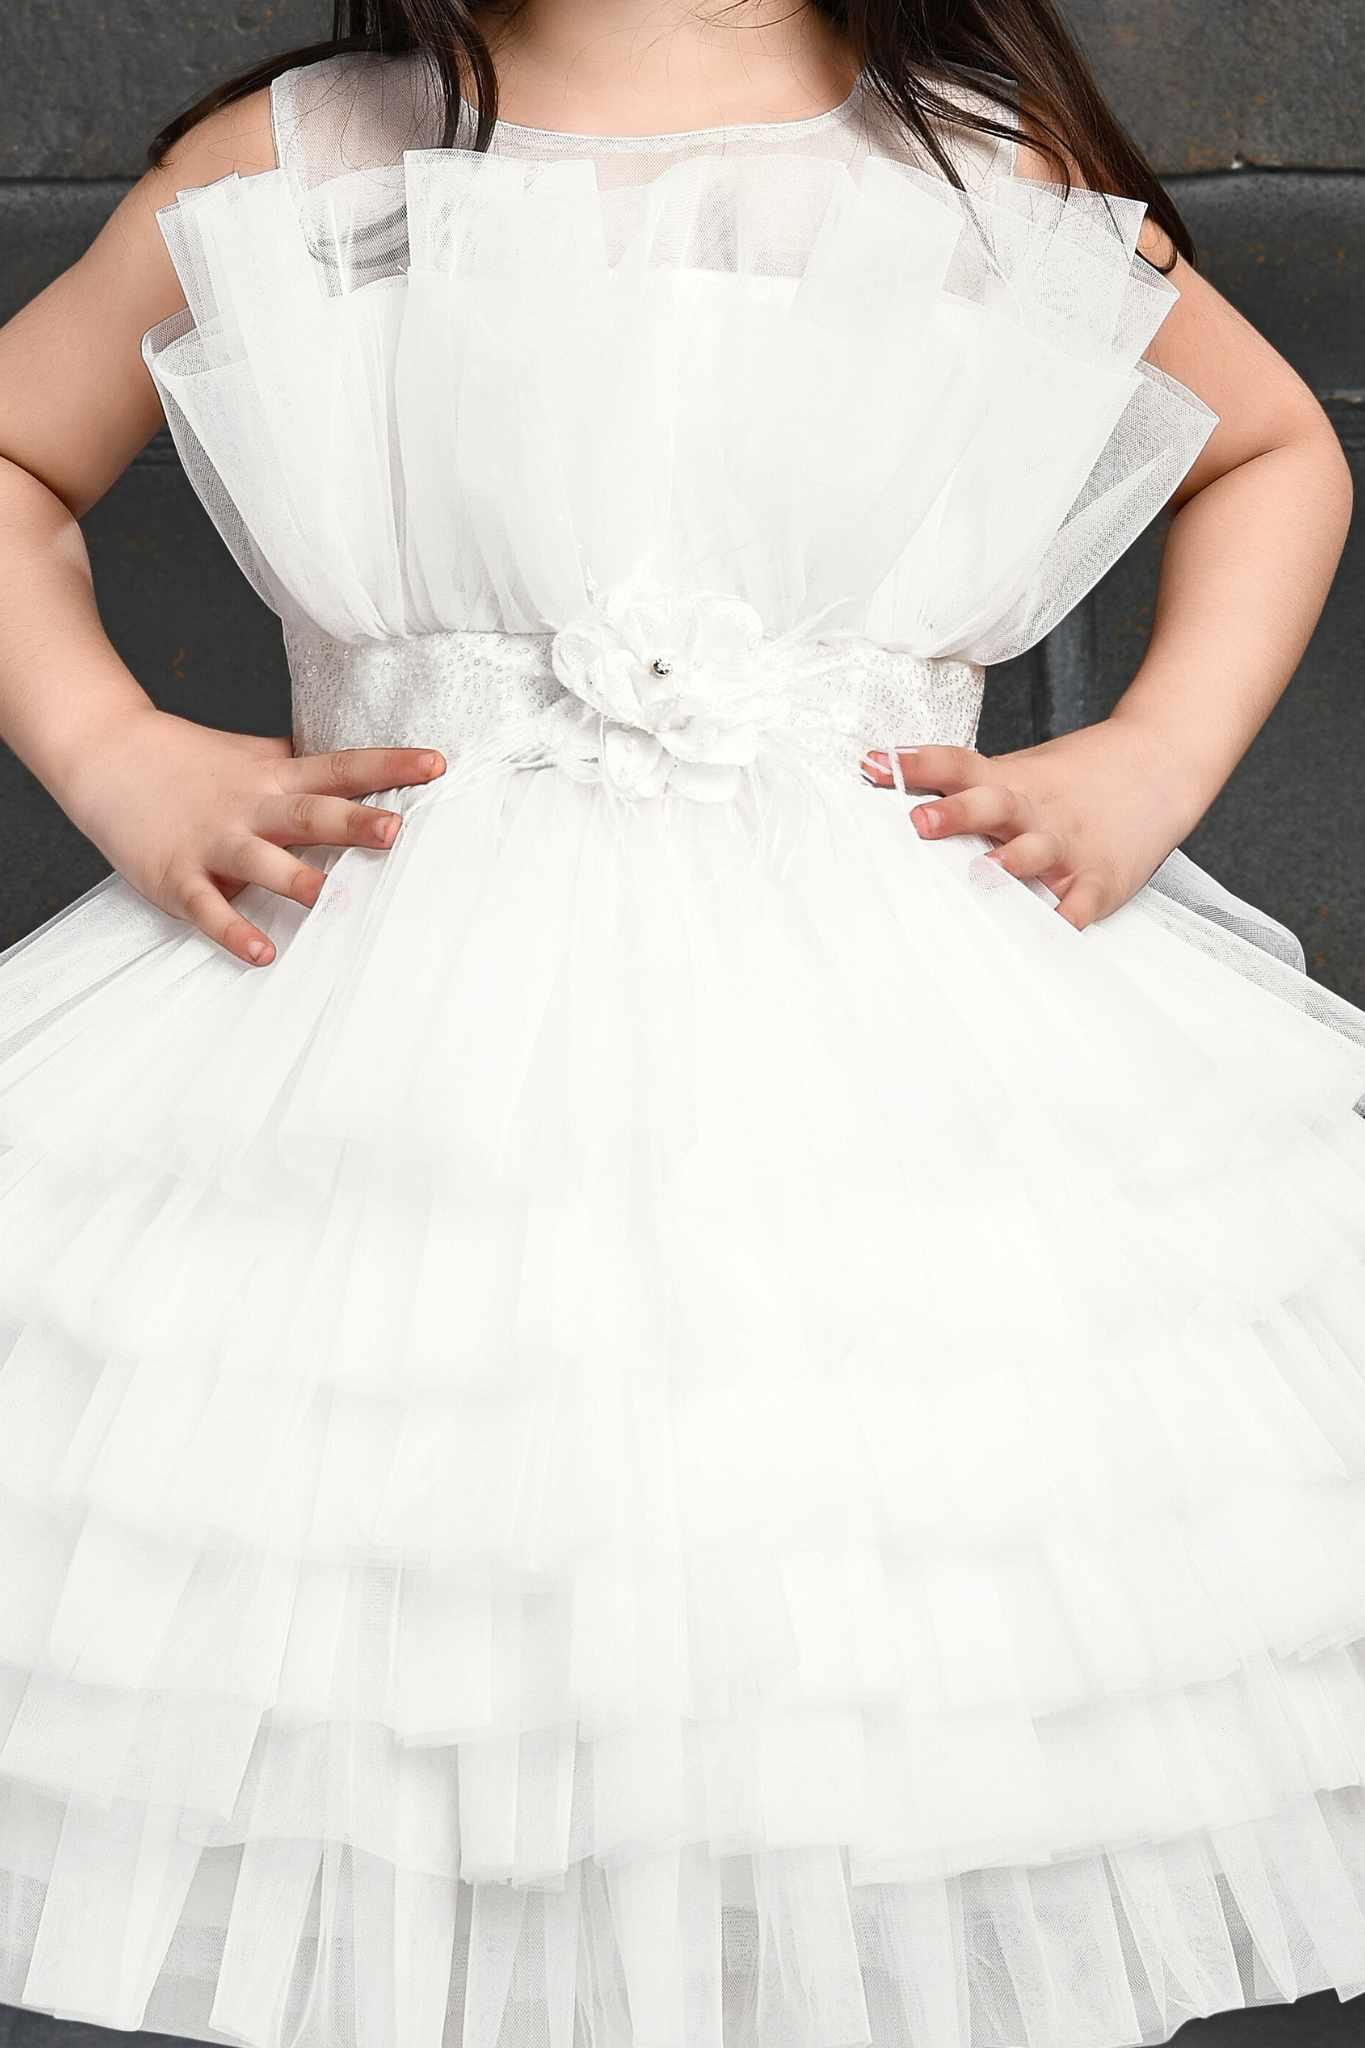 White Multi- Layered Party Wear Frock - Lagorii Kids